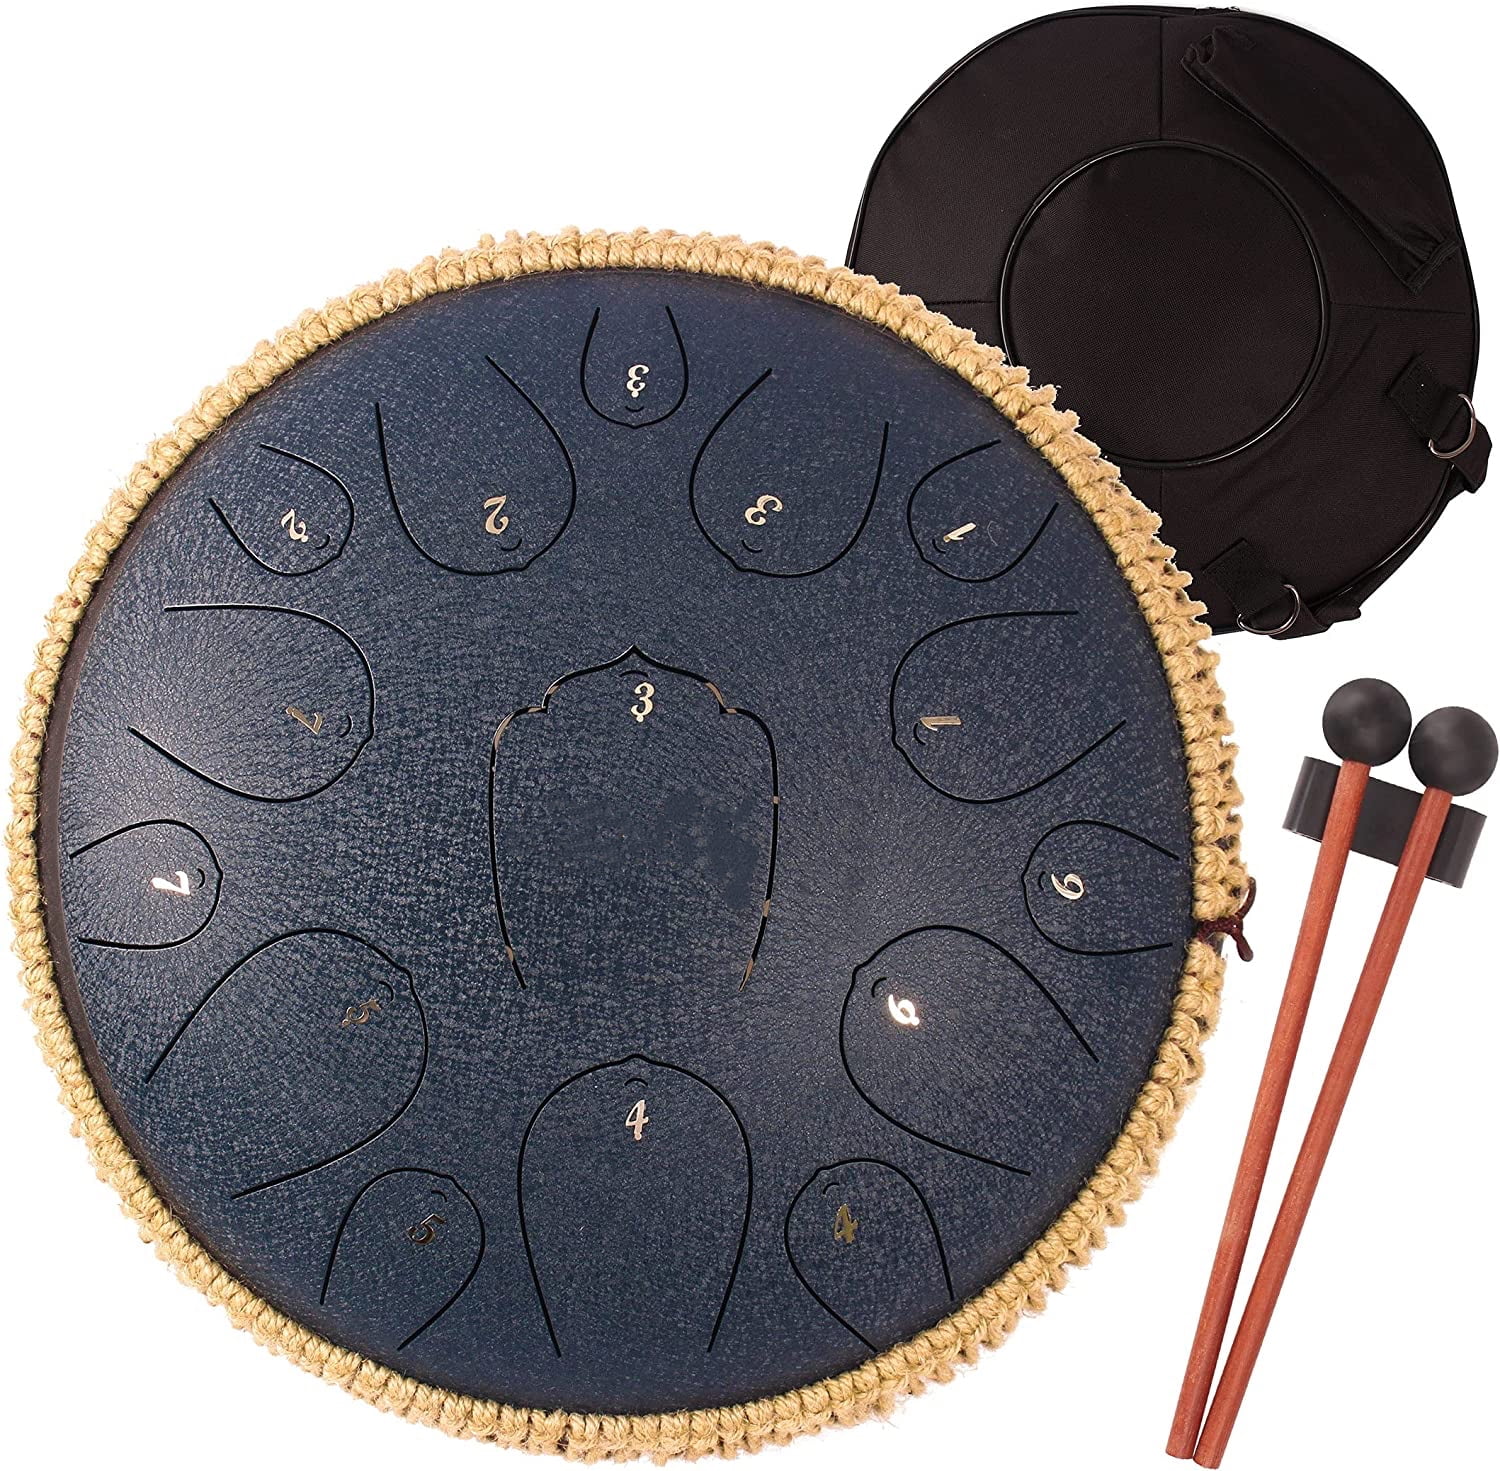 Steel tongue drum 12 inch -  France